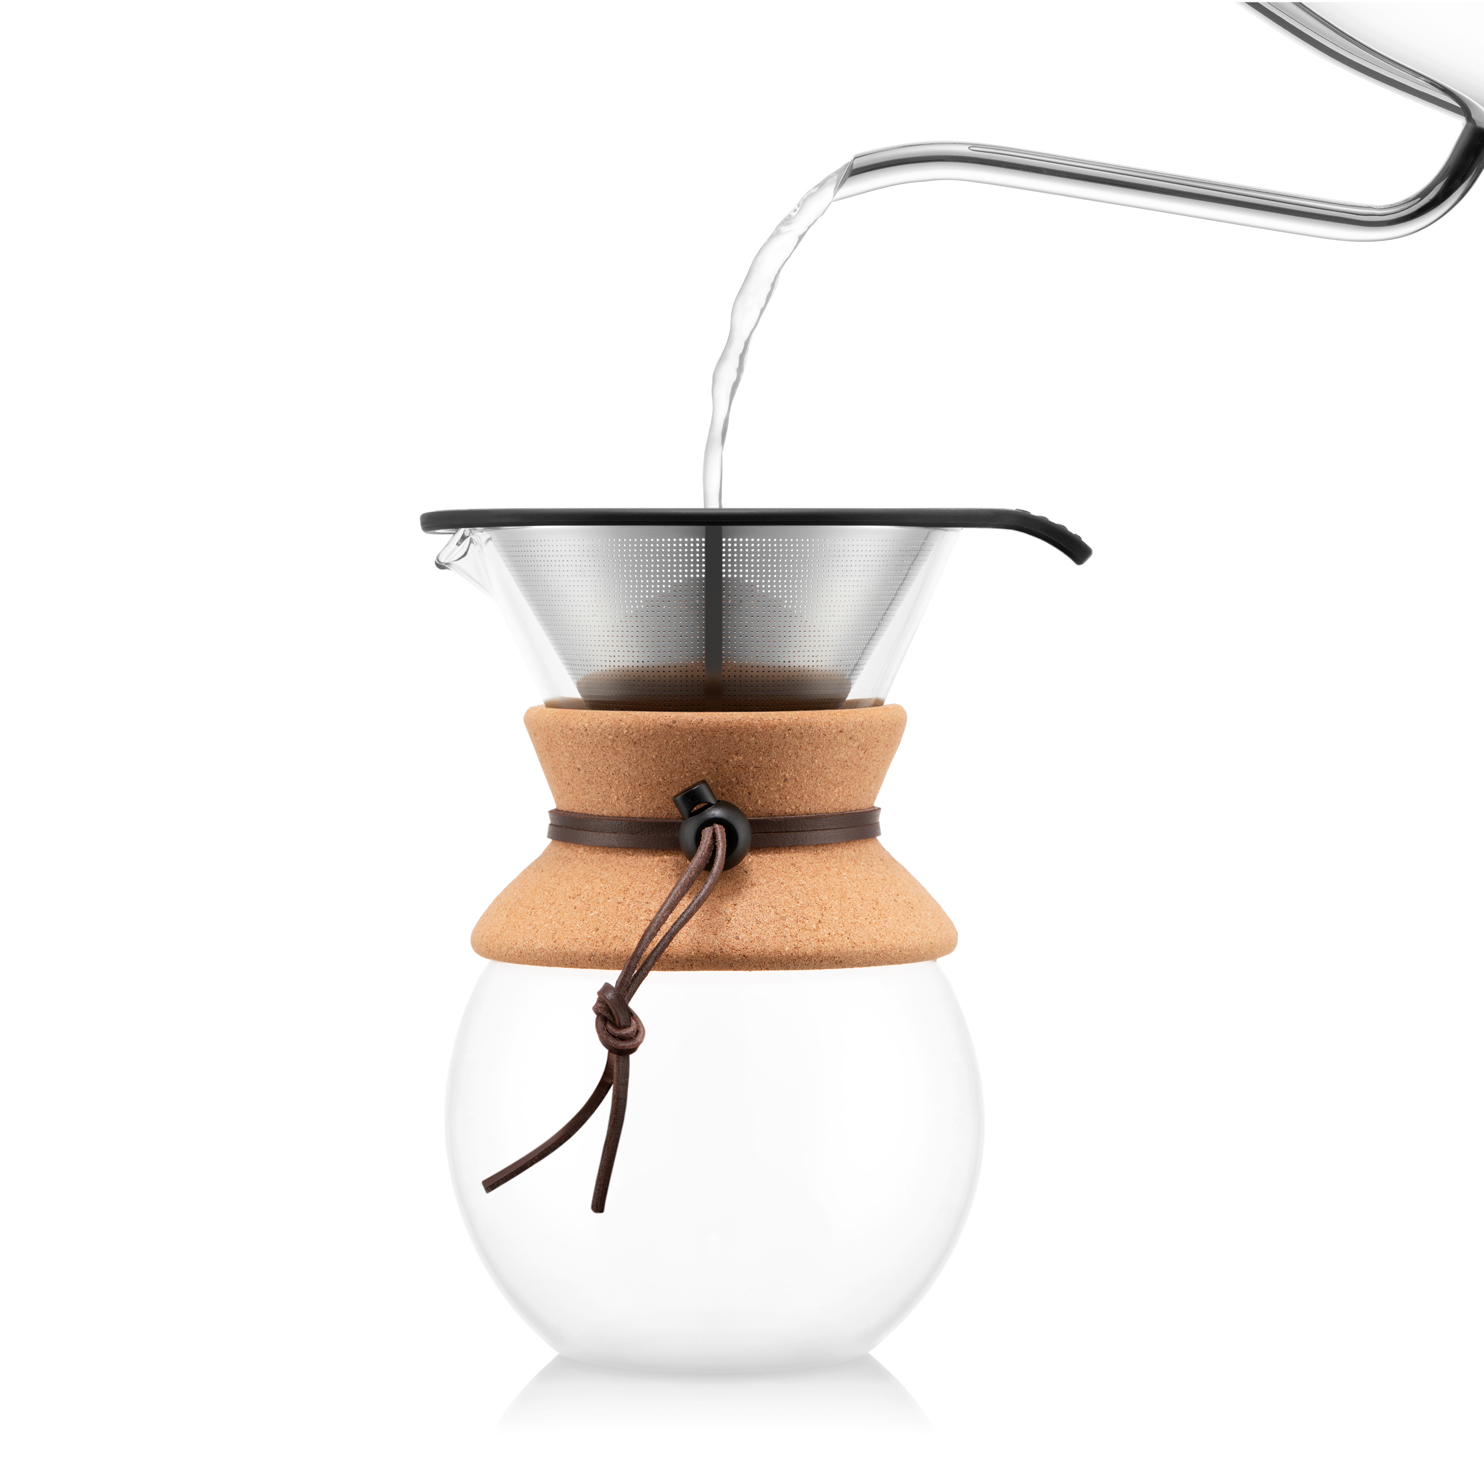 Bodum 34oz Pour Over Coffee Dripper w/ Reusable Stainless Steel Filter, Brown, Cork - image 4 of 11